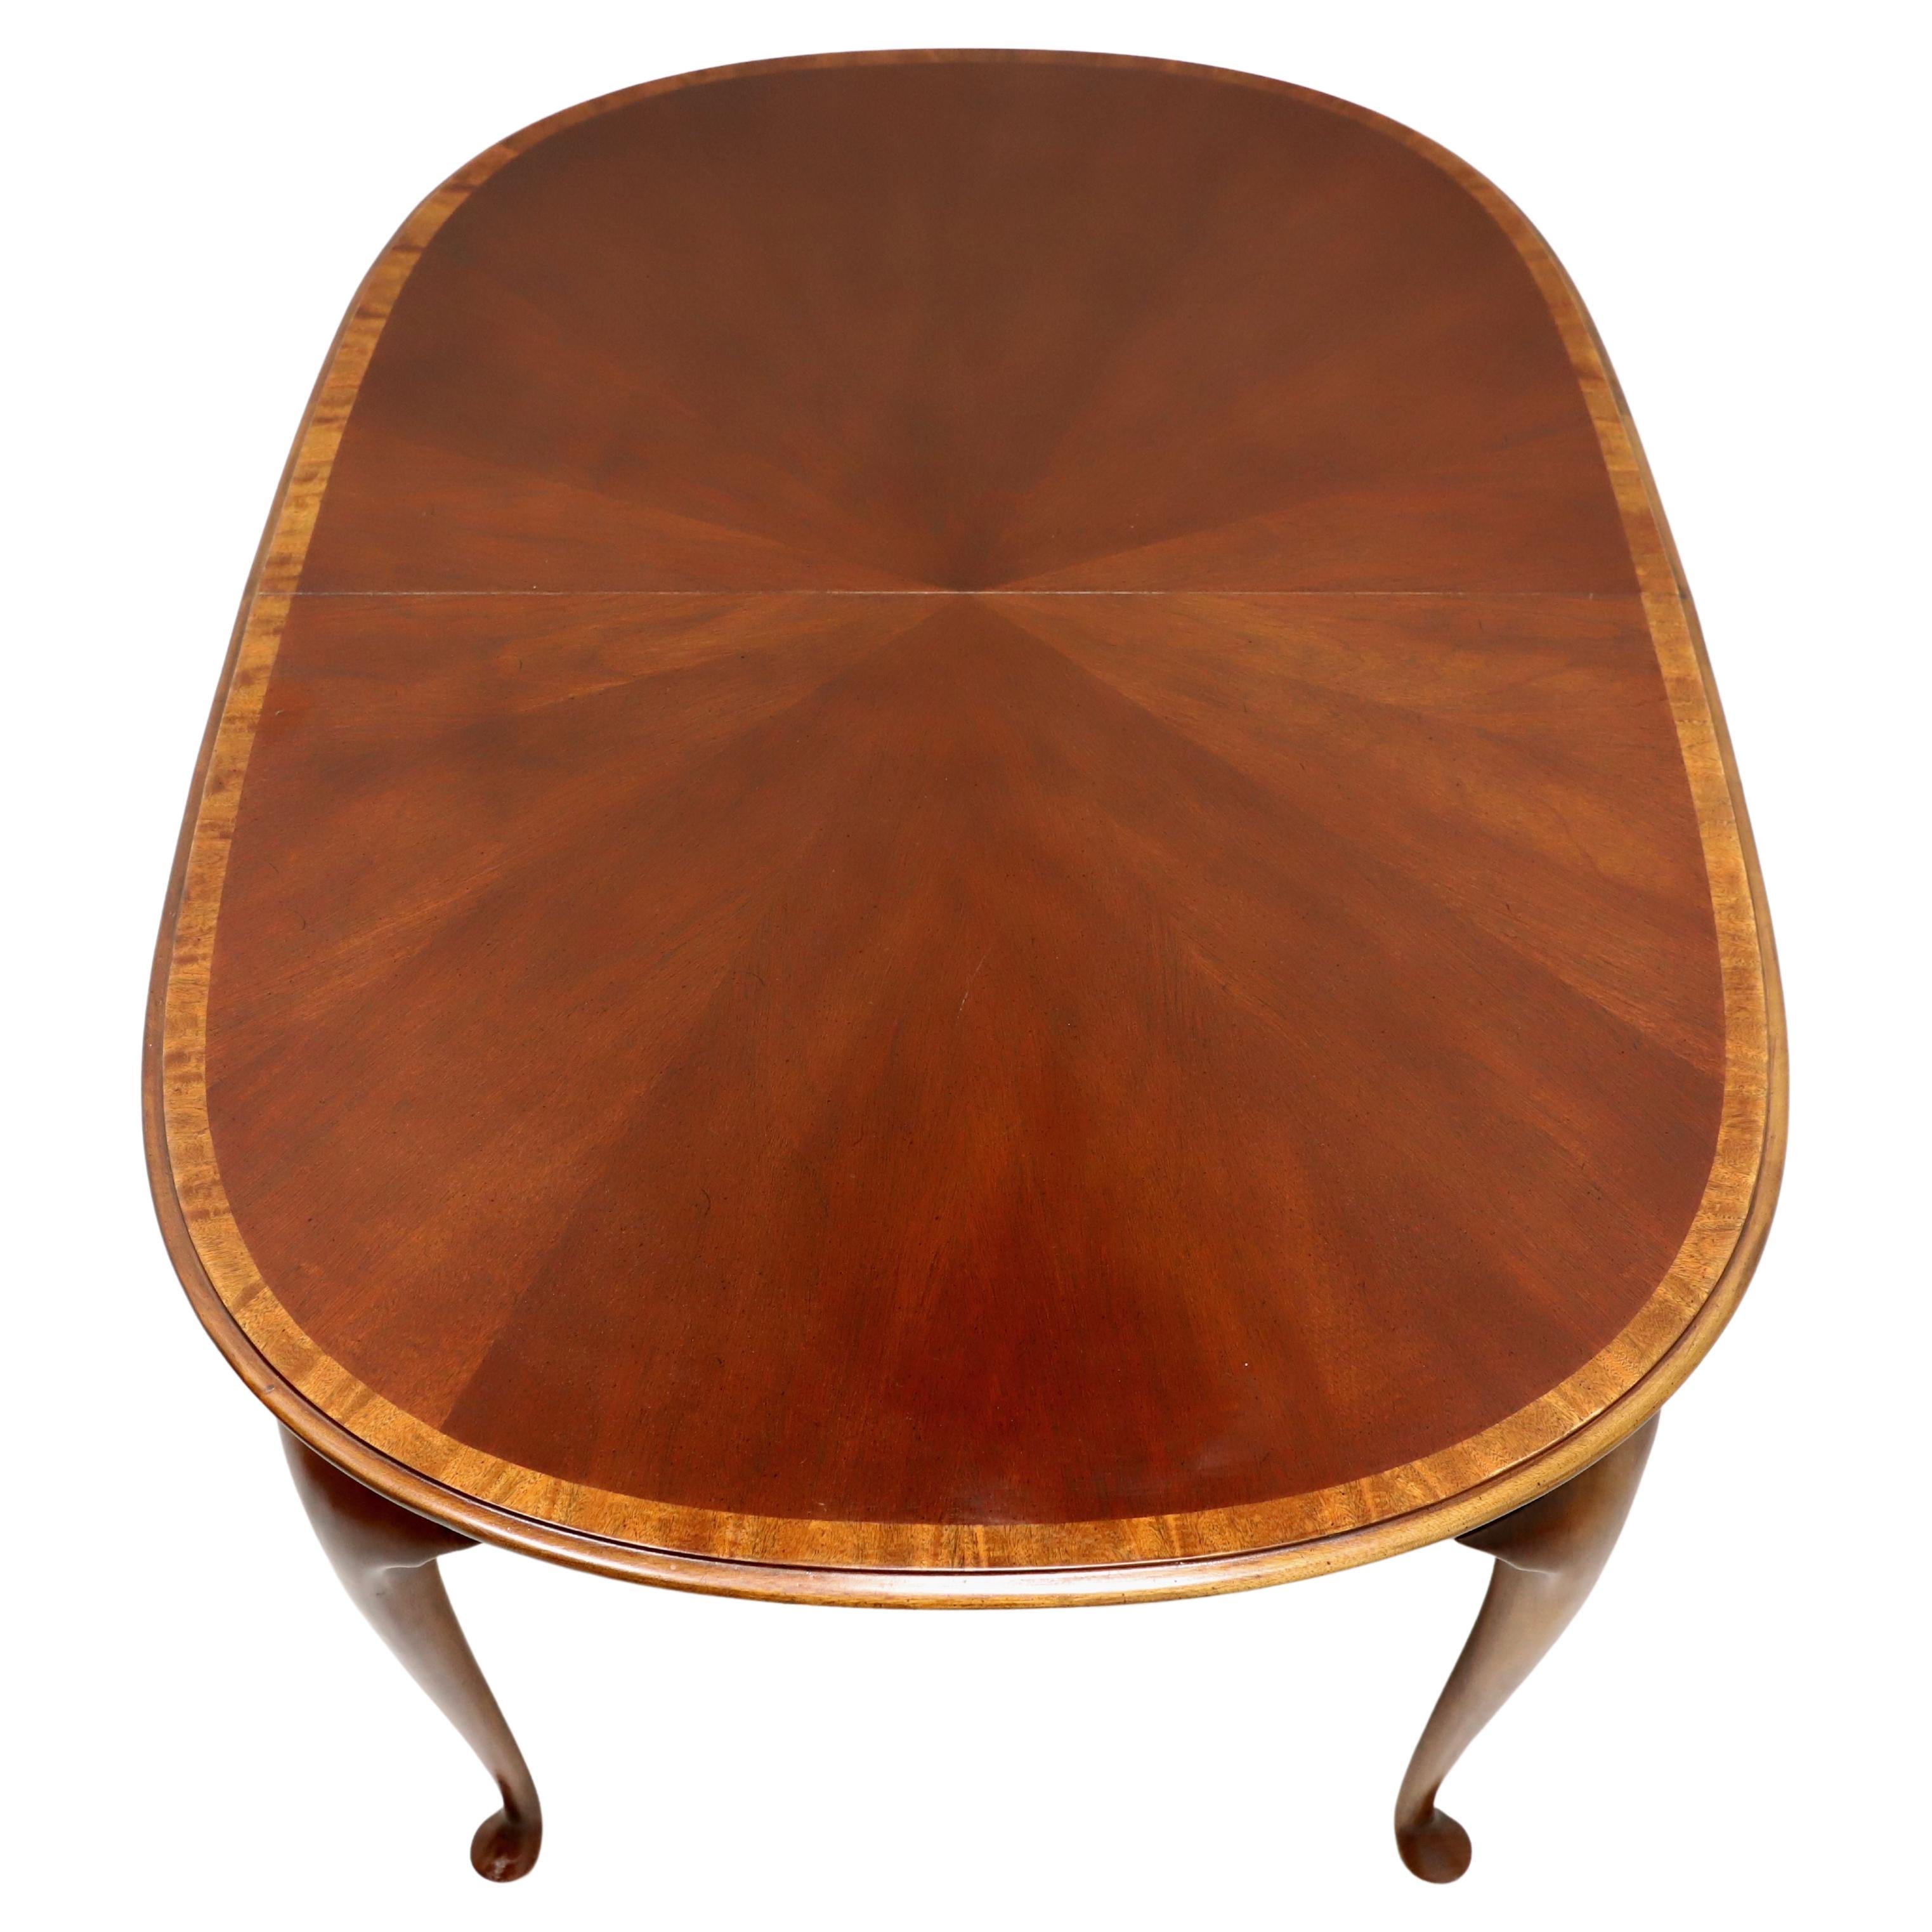 HICKORY CHAIR Banded Mahogany Queen Anne Oval Dining Table